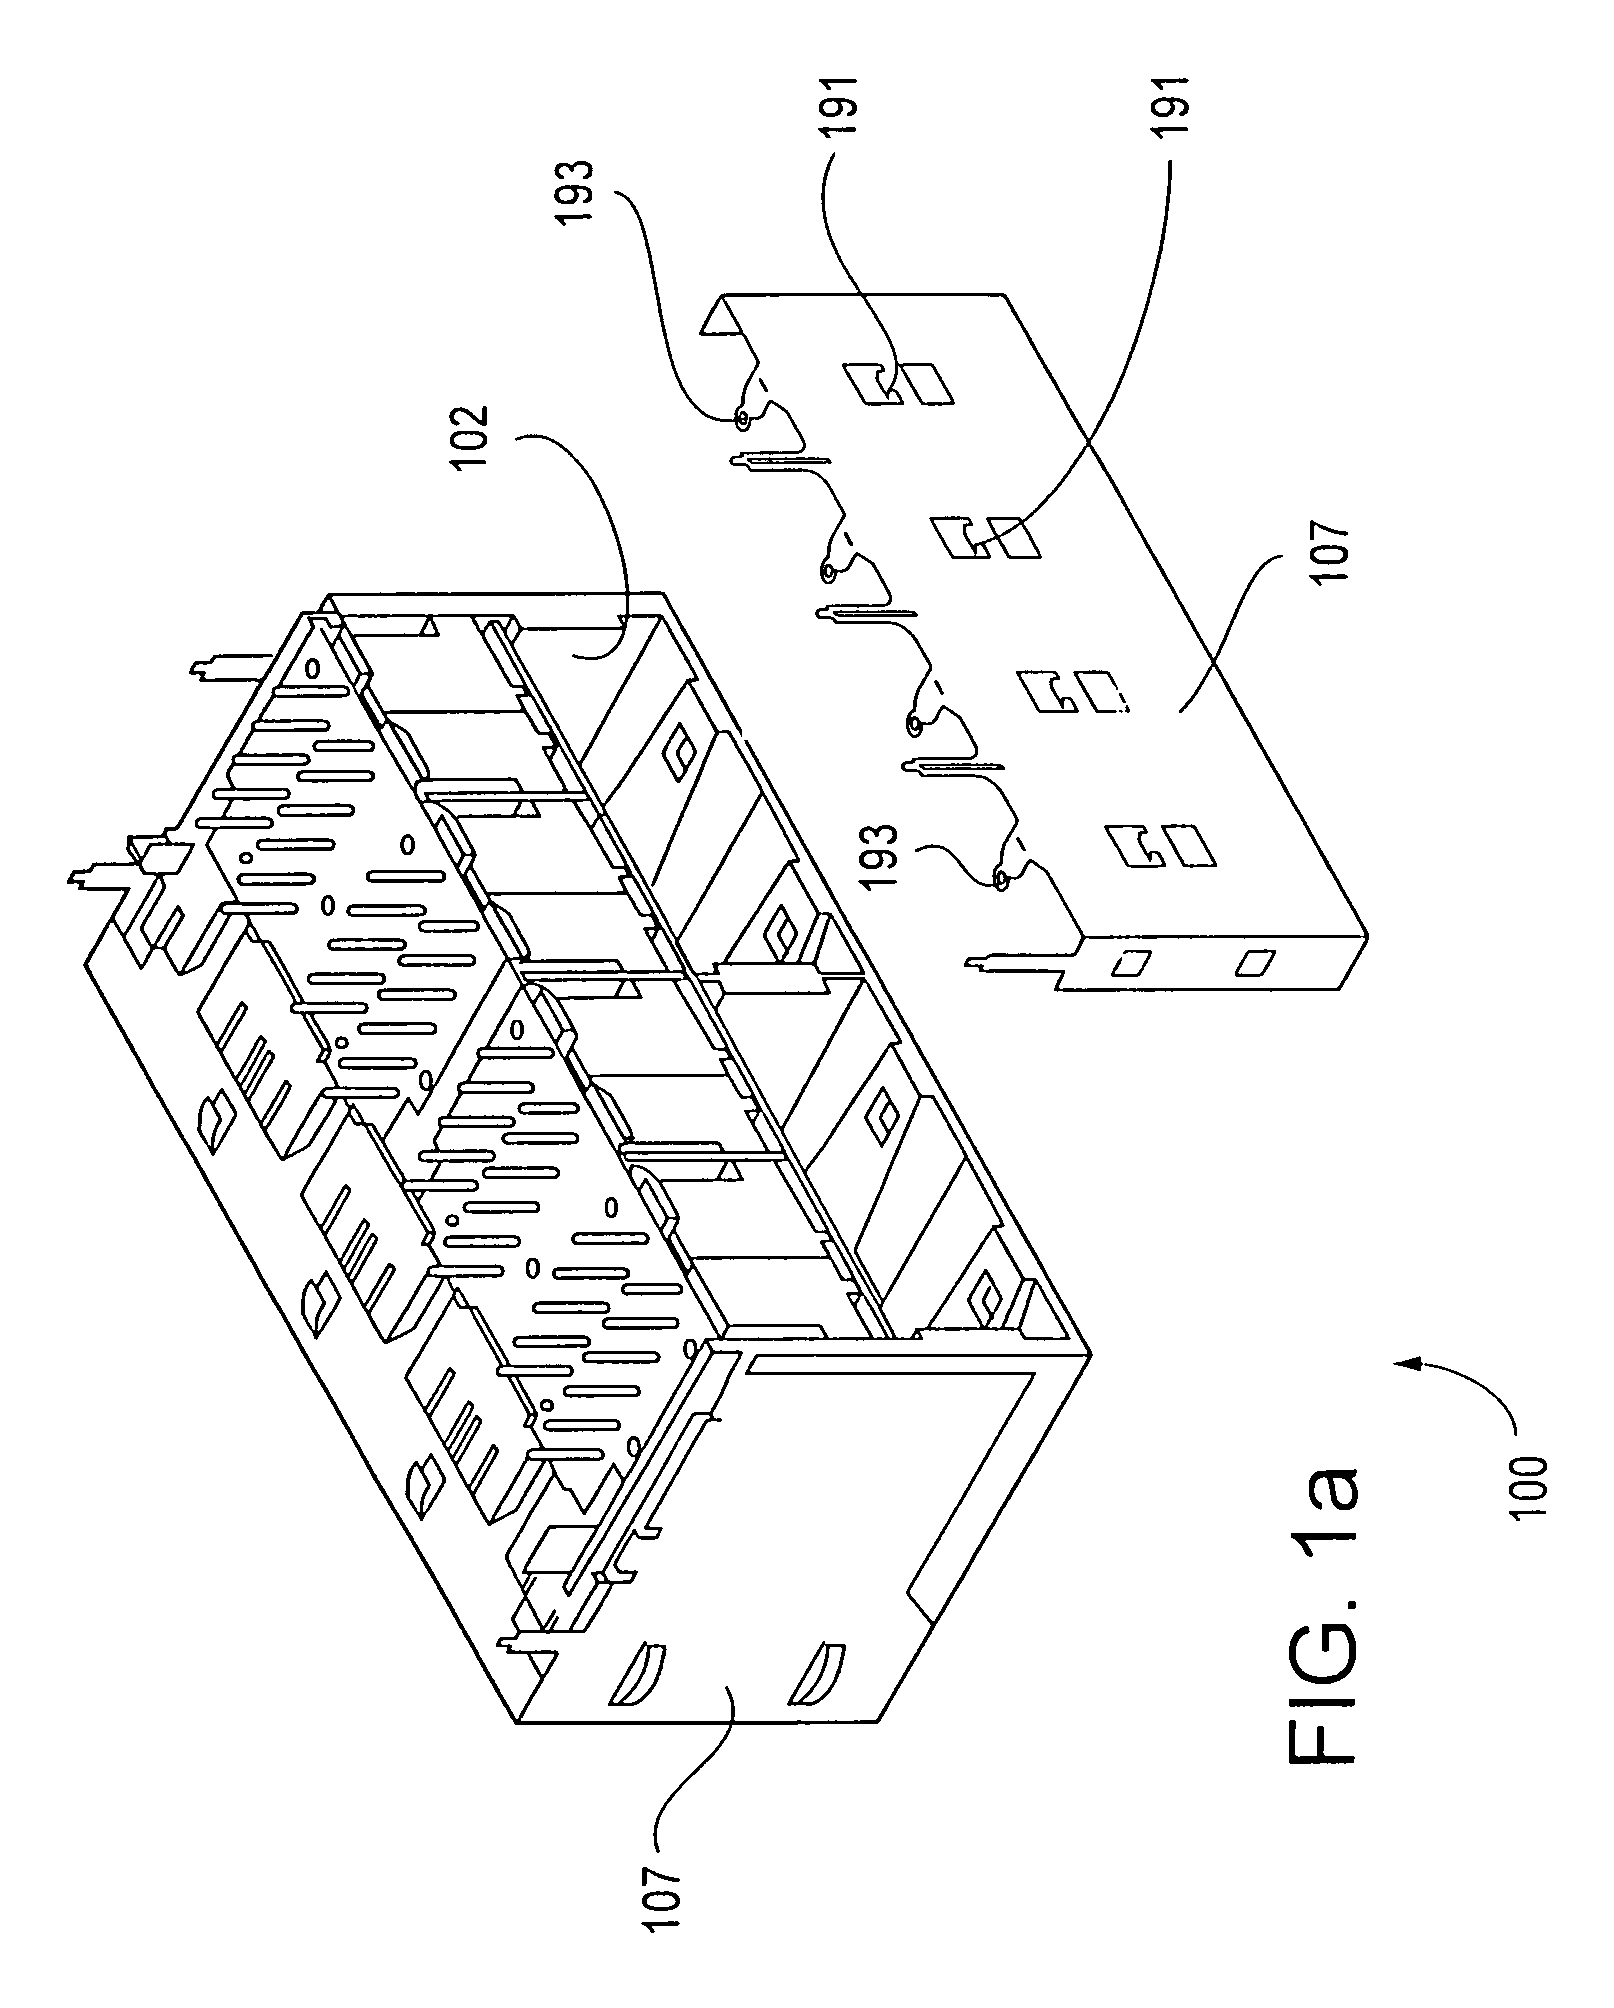 Universal connector assembly and method of manufacturing